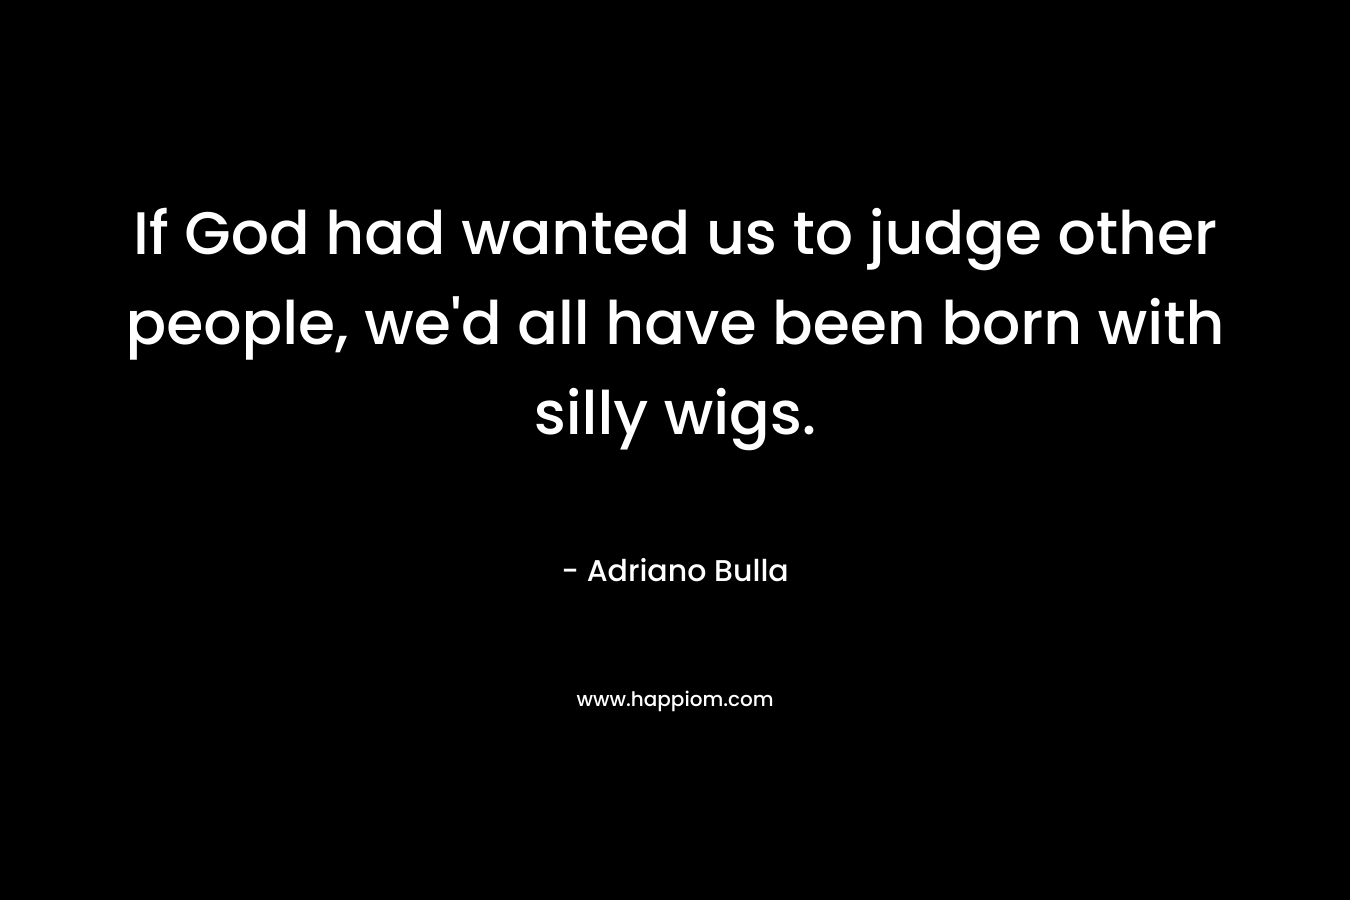 If God had wanted us to judge other people, we’d all have been born with silly wigs. – Adriano Bulla